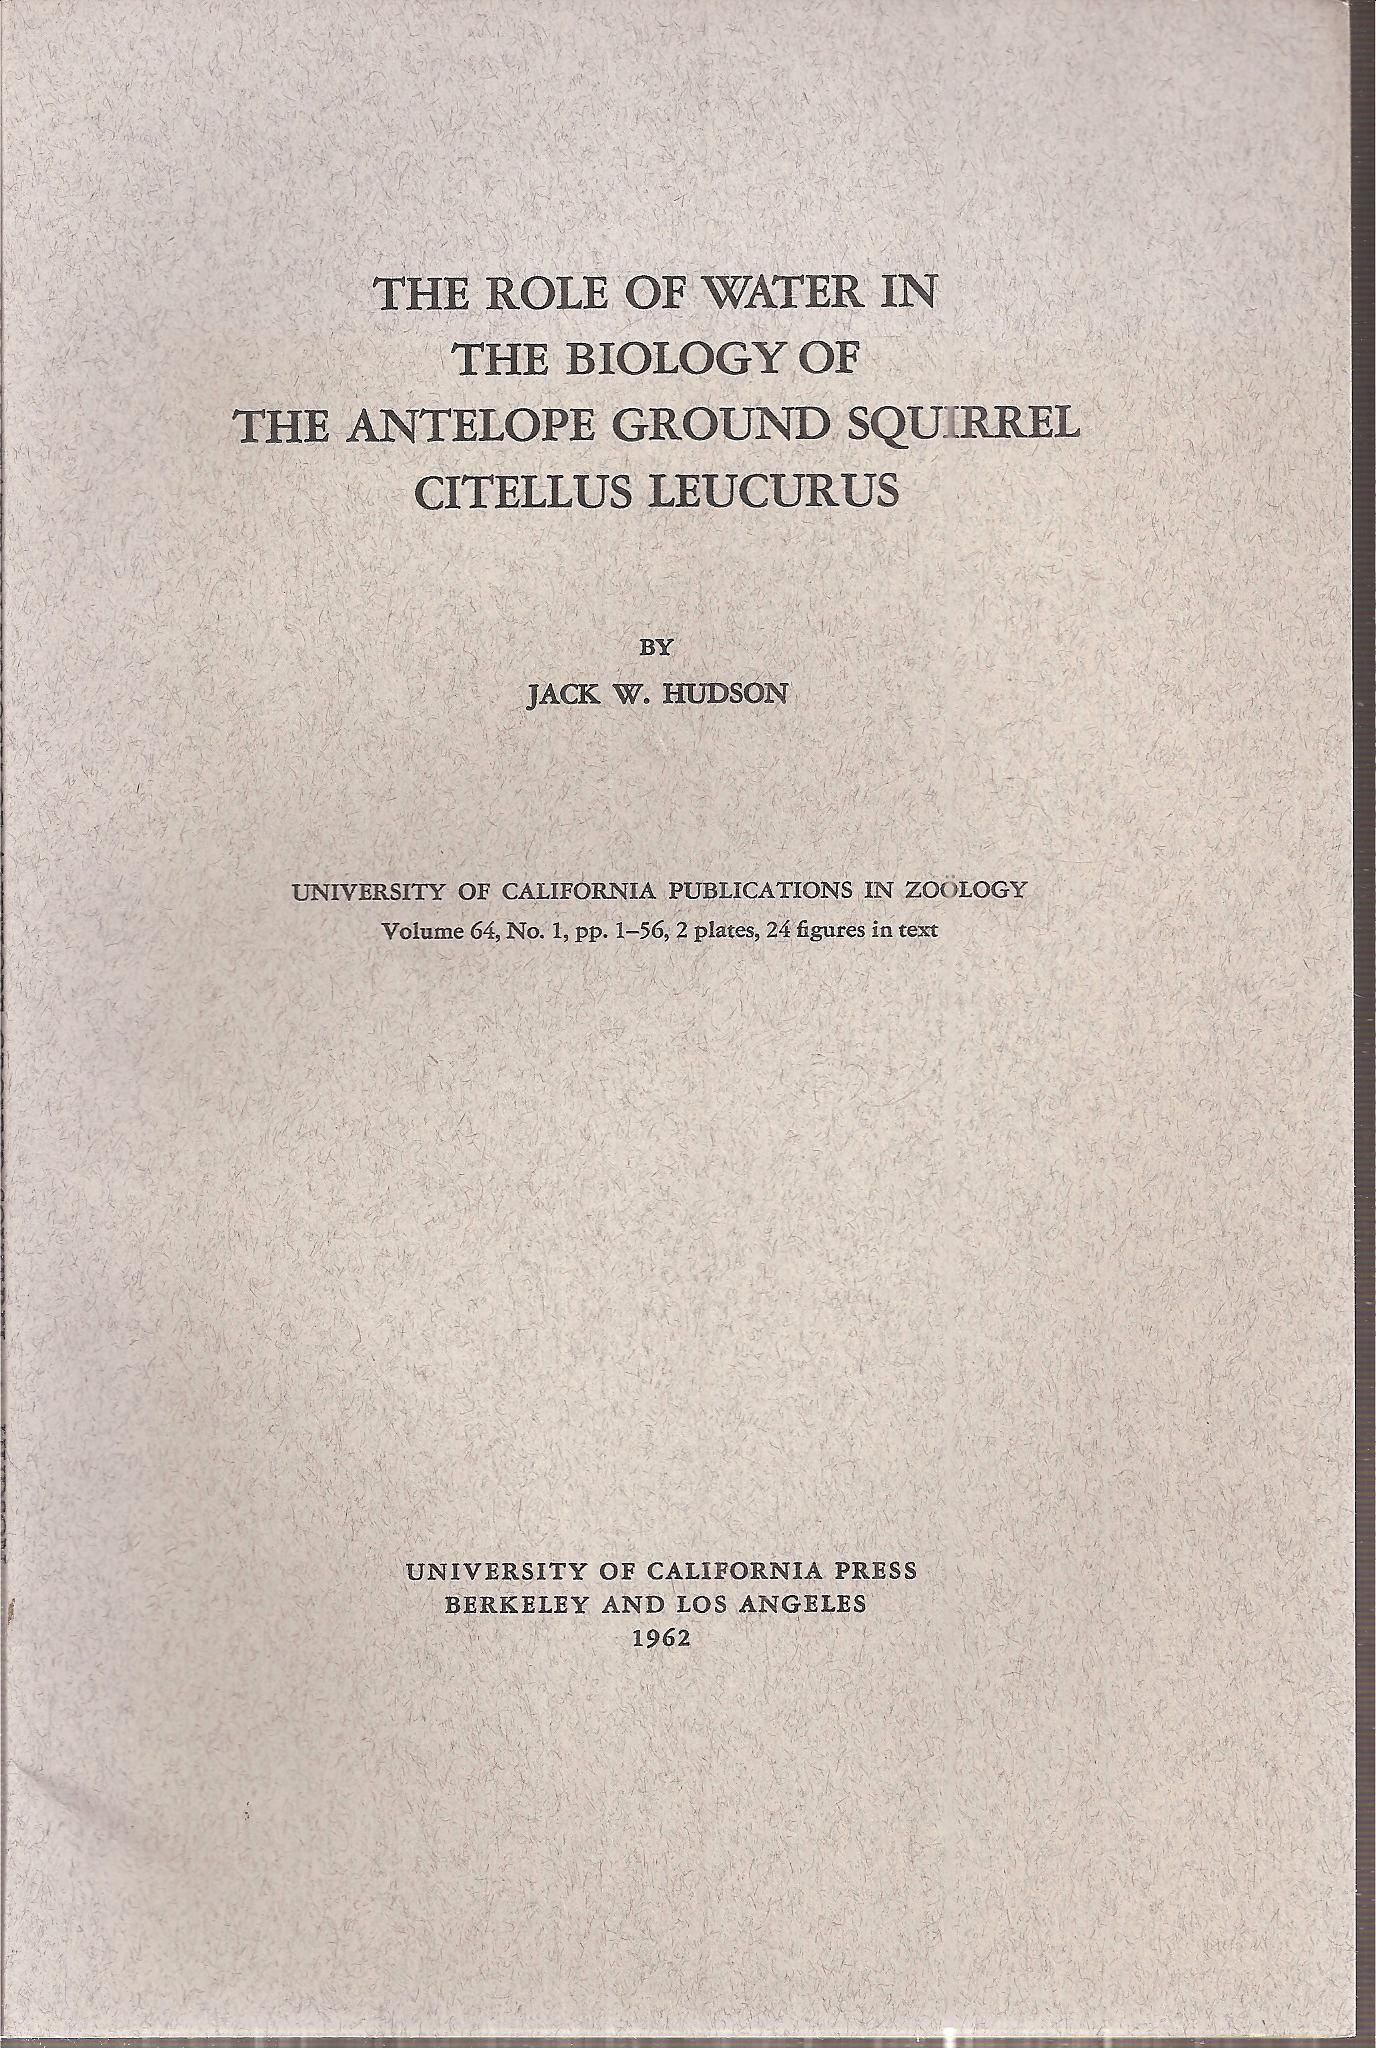 Hudson,Jack W.  The Role of Water in The Biology of the Antelope Ground Squirrel 